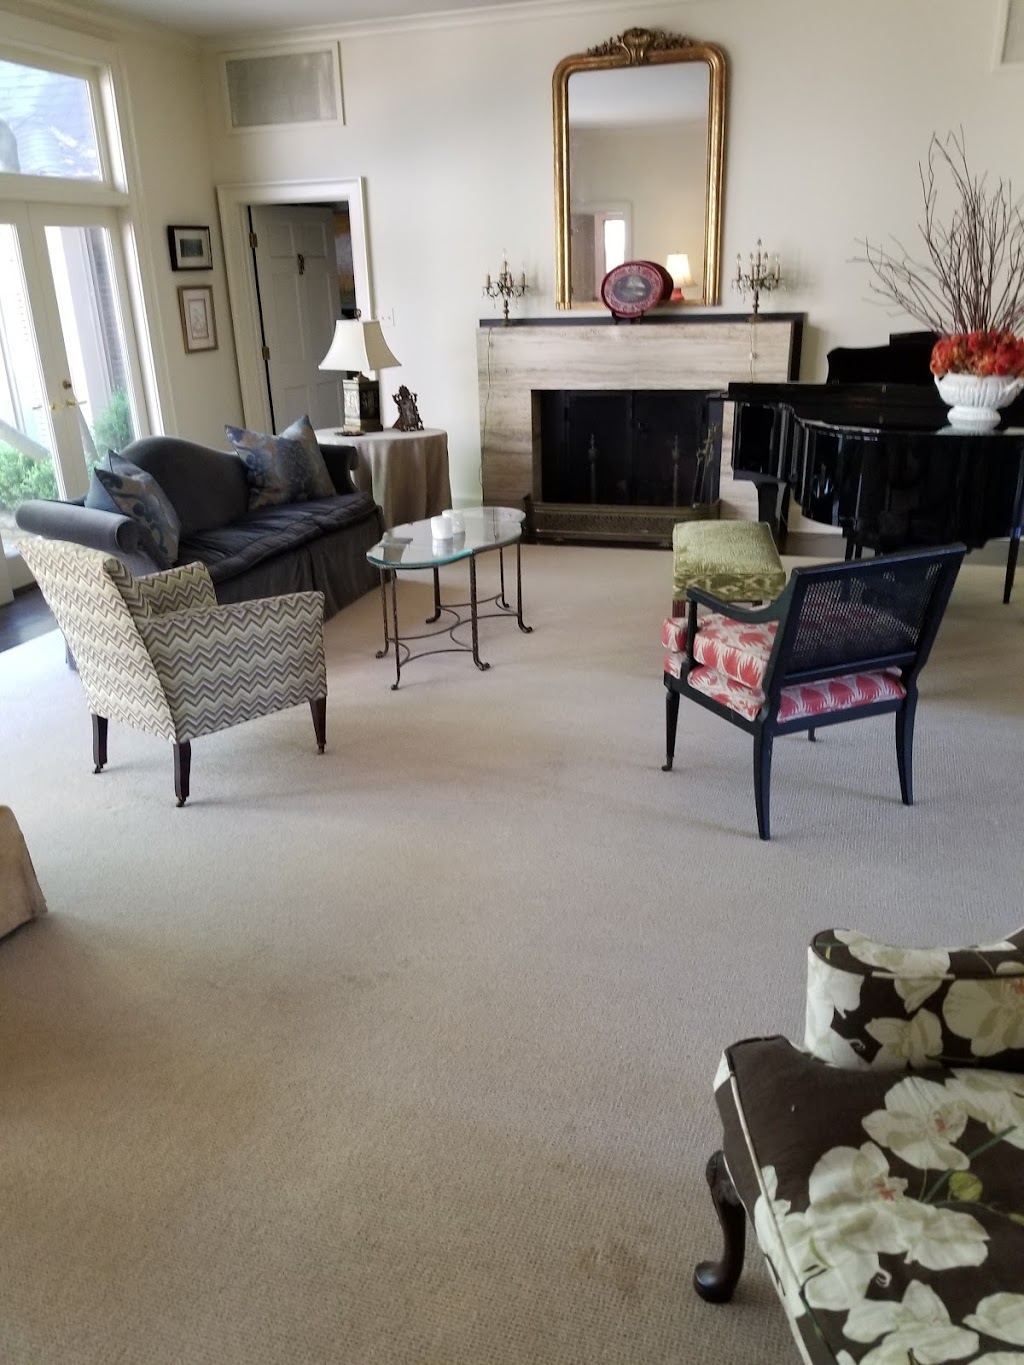 Nortons Carpet & Upholstery | Woodsedge, 75 Grand Branches Dr, Eads, TN 38028 | Phone: (901) 827-0062